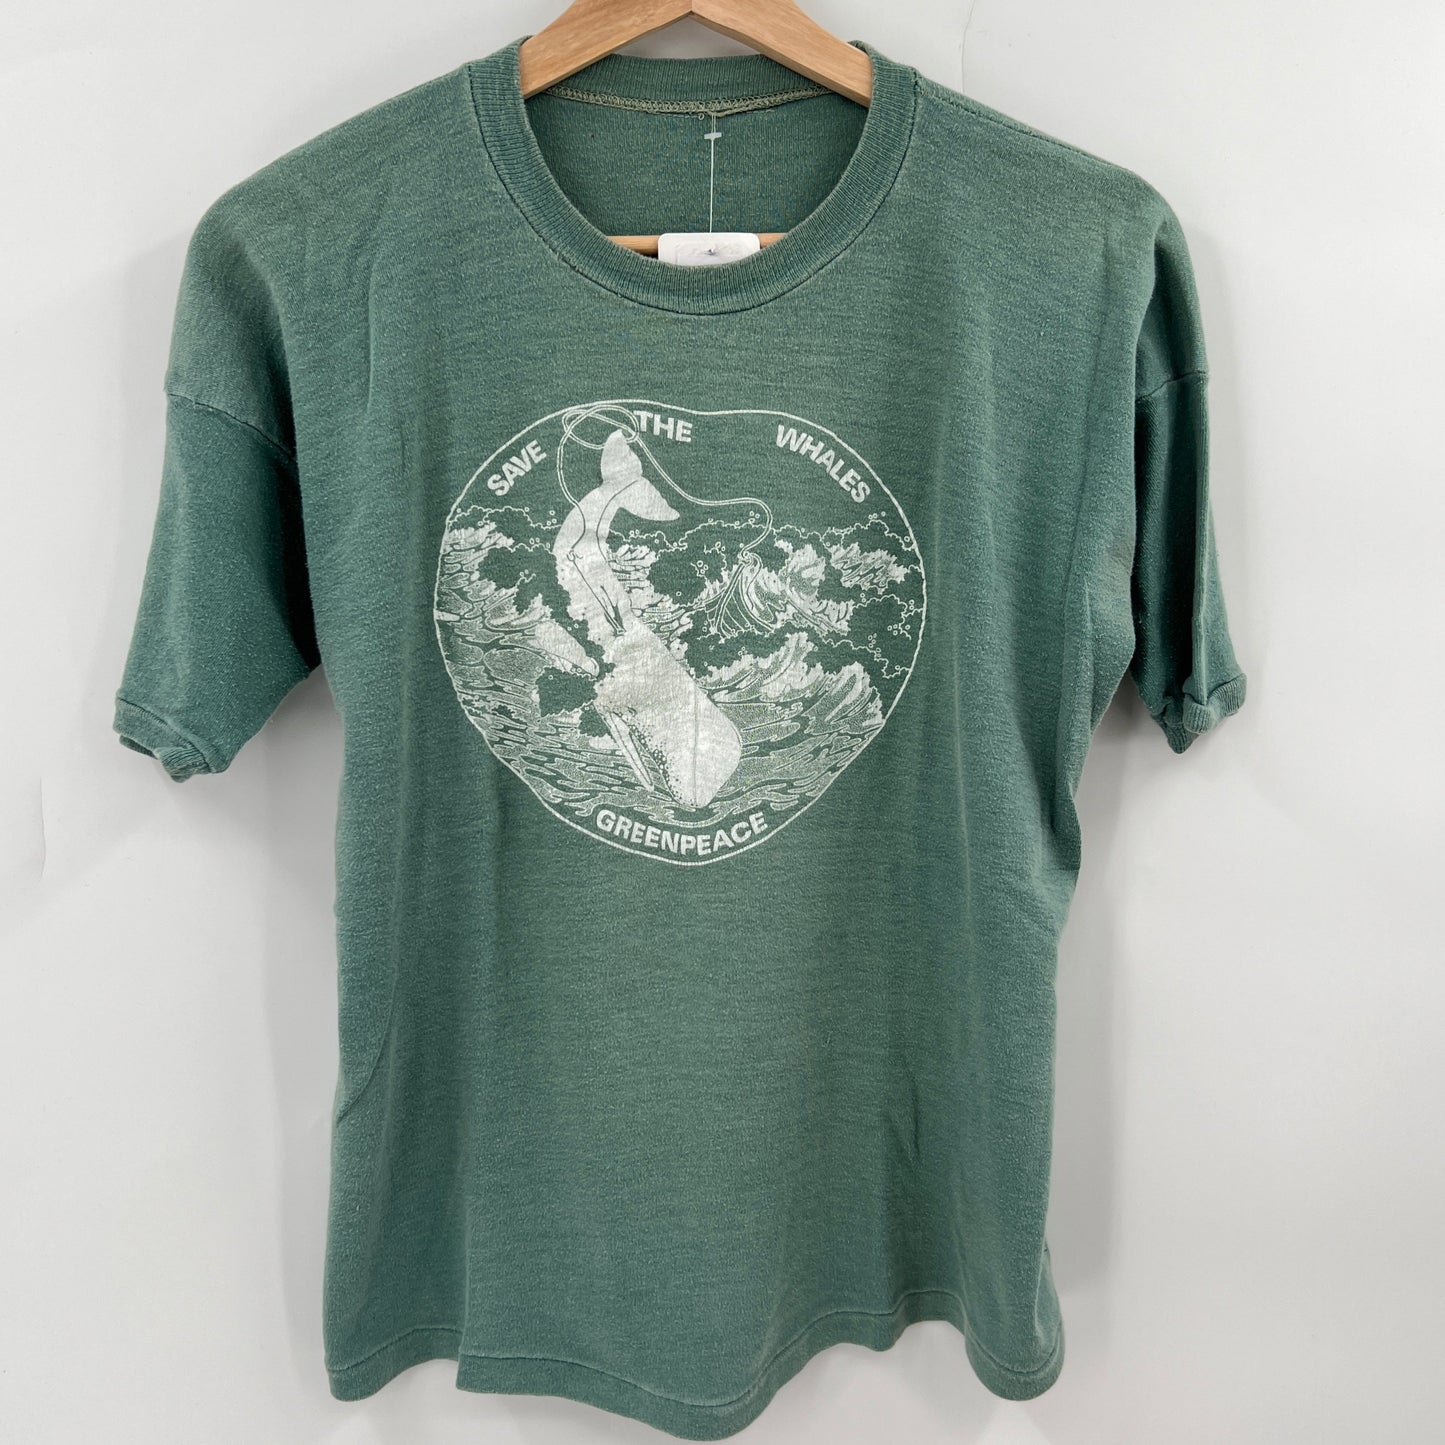 SOLD. Vintage Greenpeace Loopwheel Save the whales Tee S